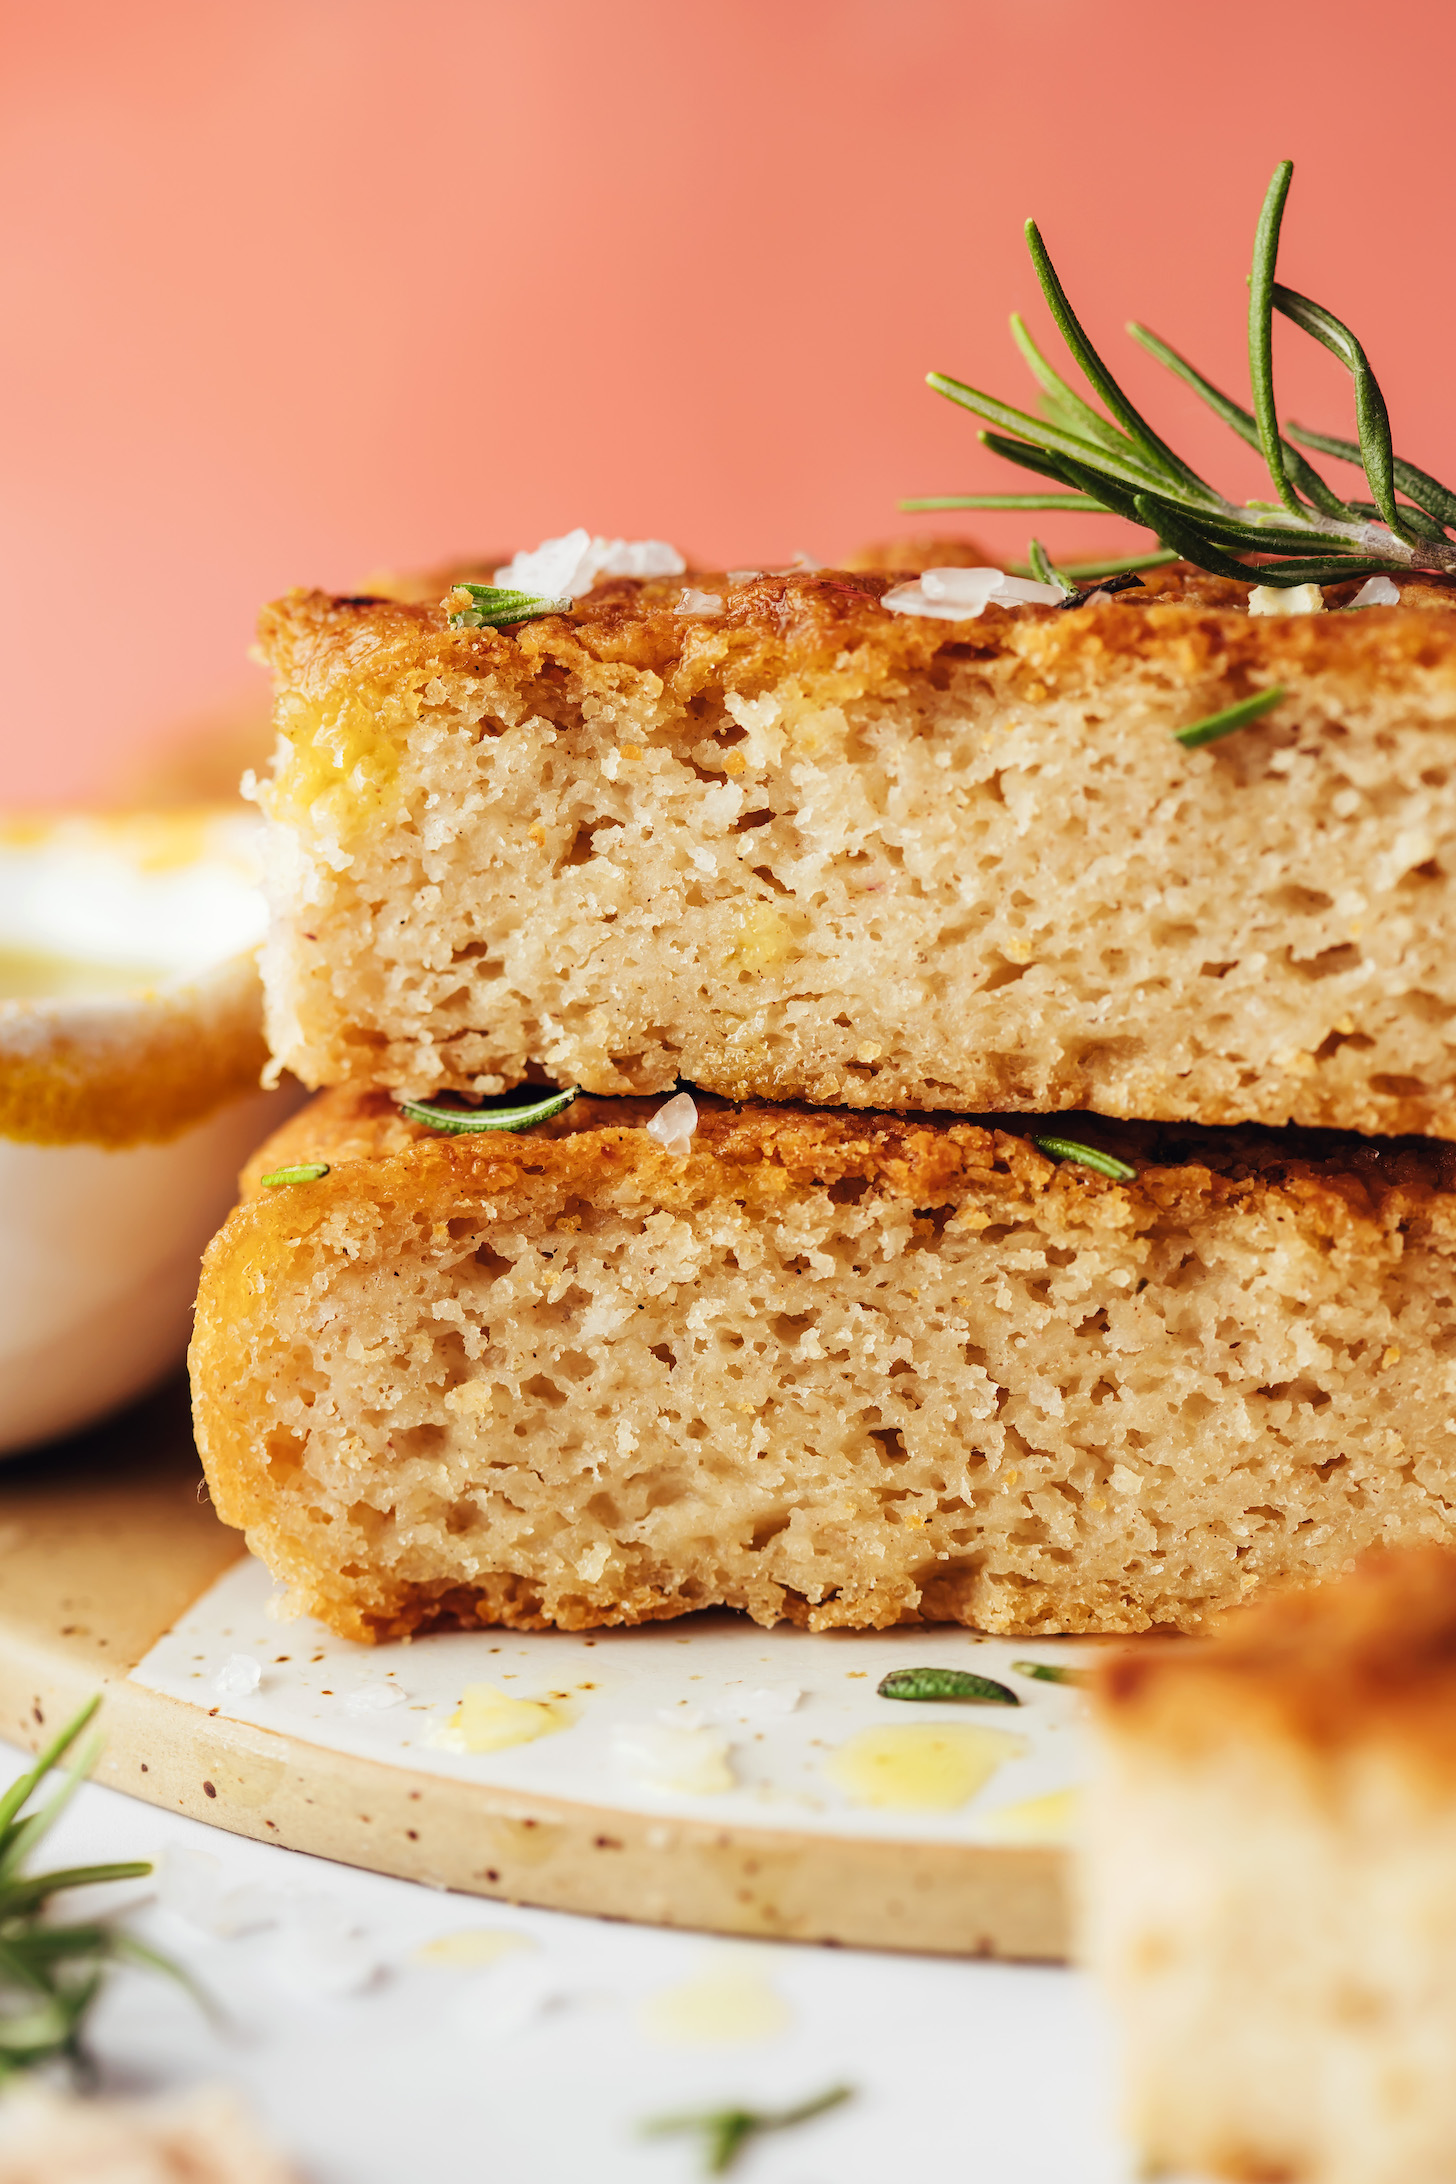 Stack of two pieces of gluten-free focaccia bread topped with rosemary